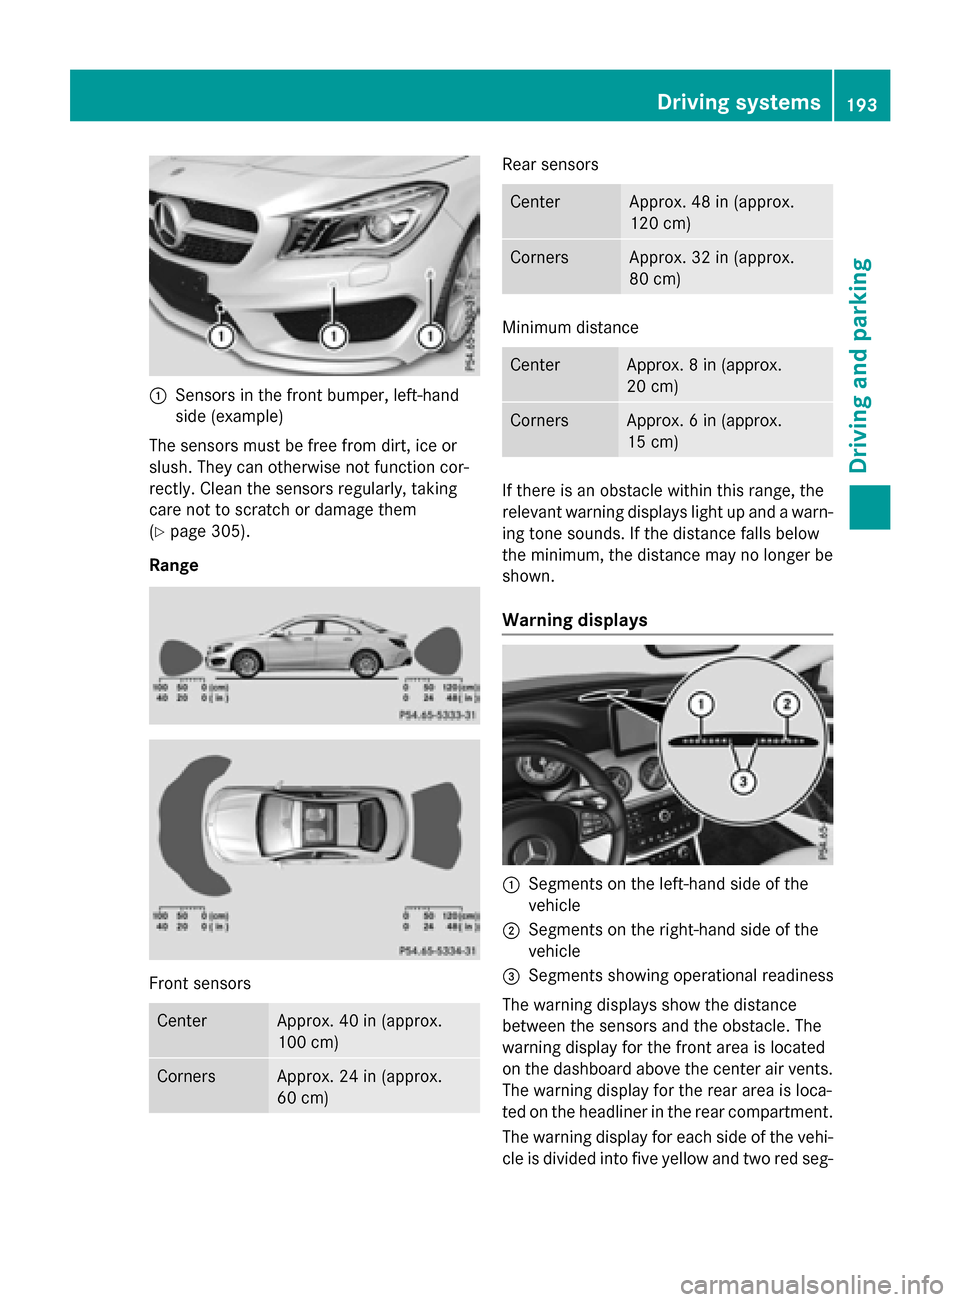 MERCEDES-BENZ CLA-Class 2016 C117 Owners Manual :Sensors in the front bumper, left-hand
side (example)
The sensors must be free from dirt, ice or
slush. They can otherwise not function cor-
rectly. Clean the sensors regularly, taking
care not to sc